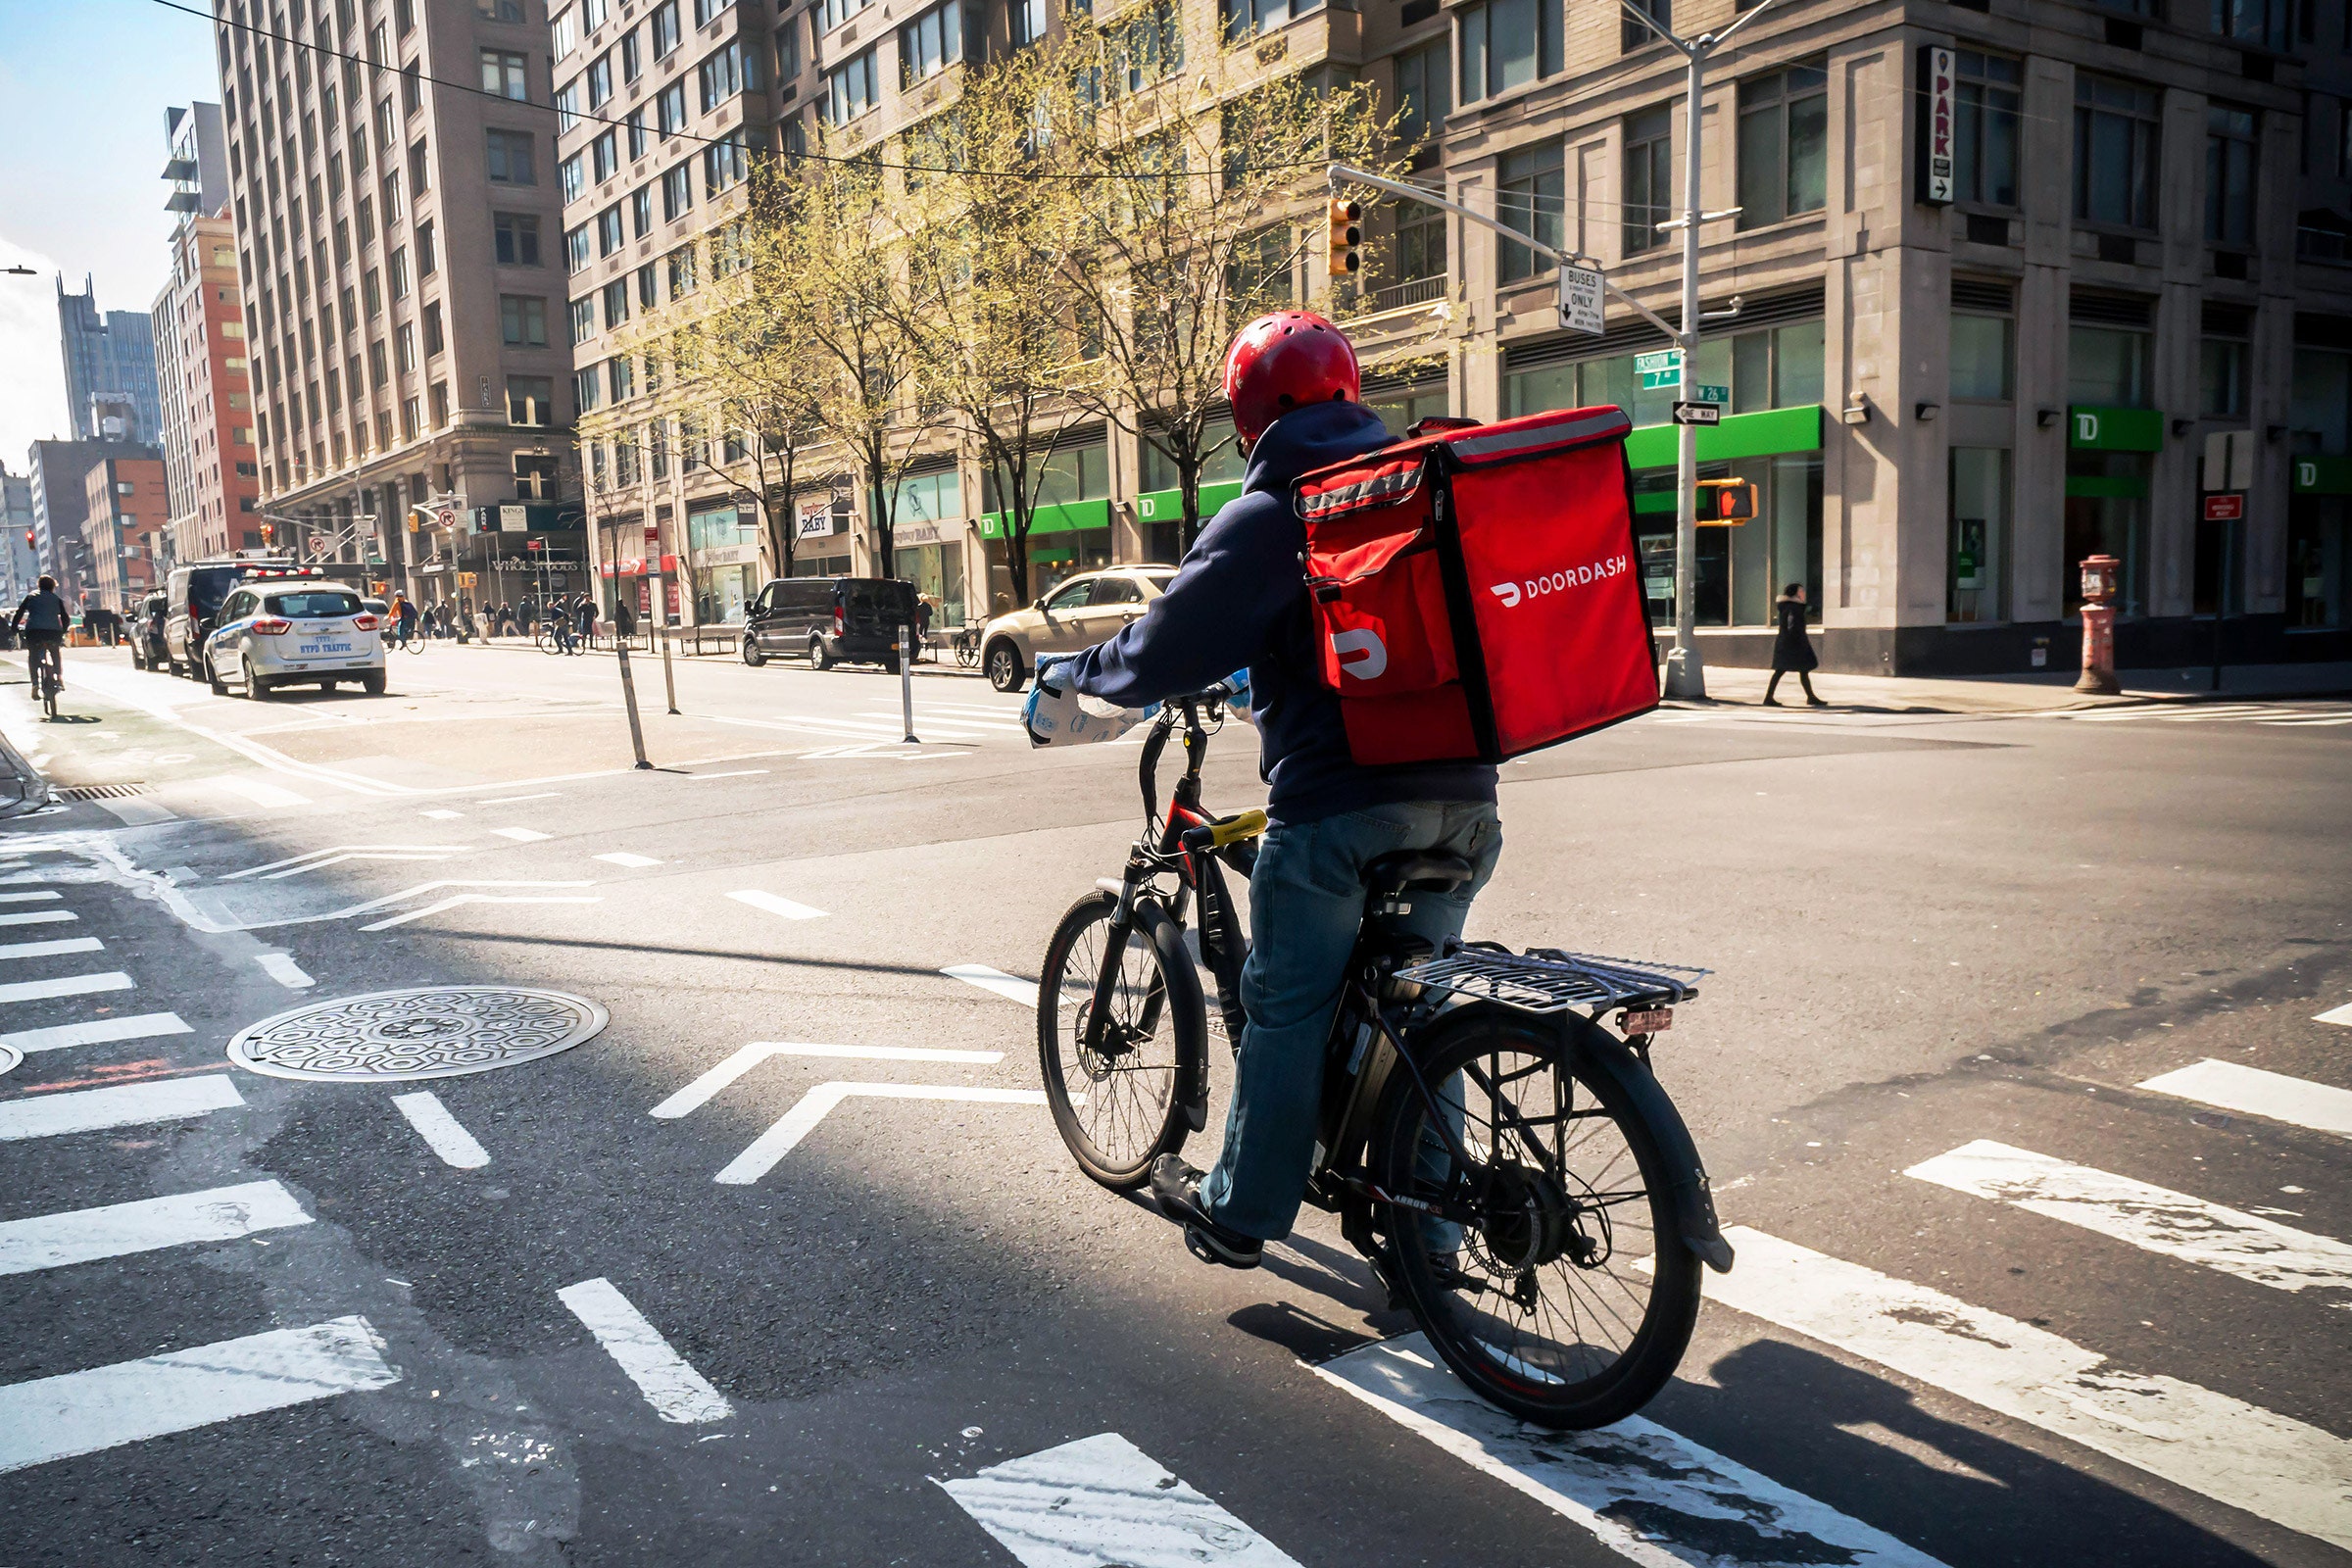 Deliveries will be made by every DoorDash employee, from engineers to the CEO